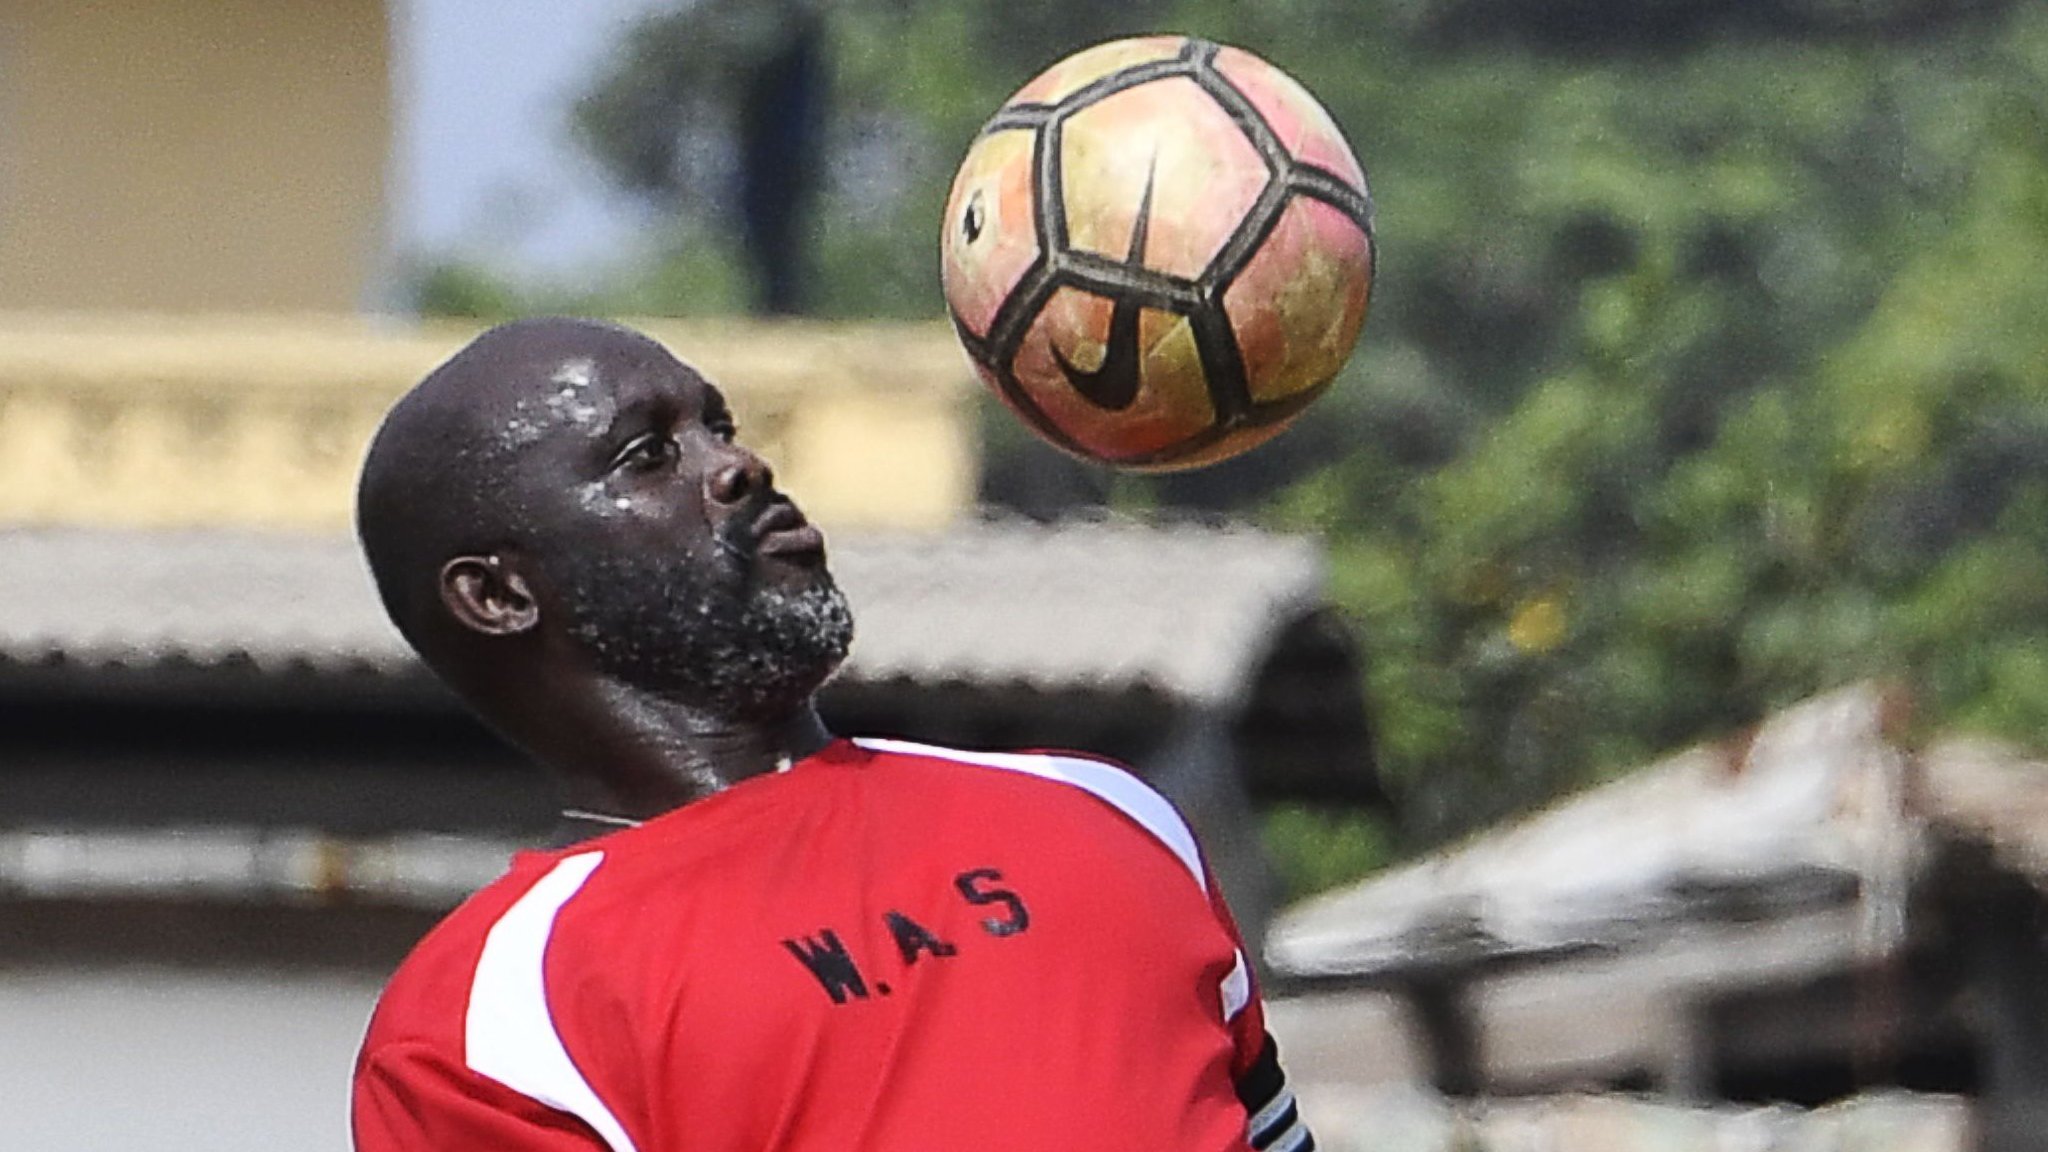 Liberia president Weah plays friendly against Nigeria - at 51